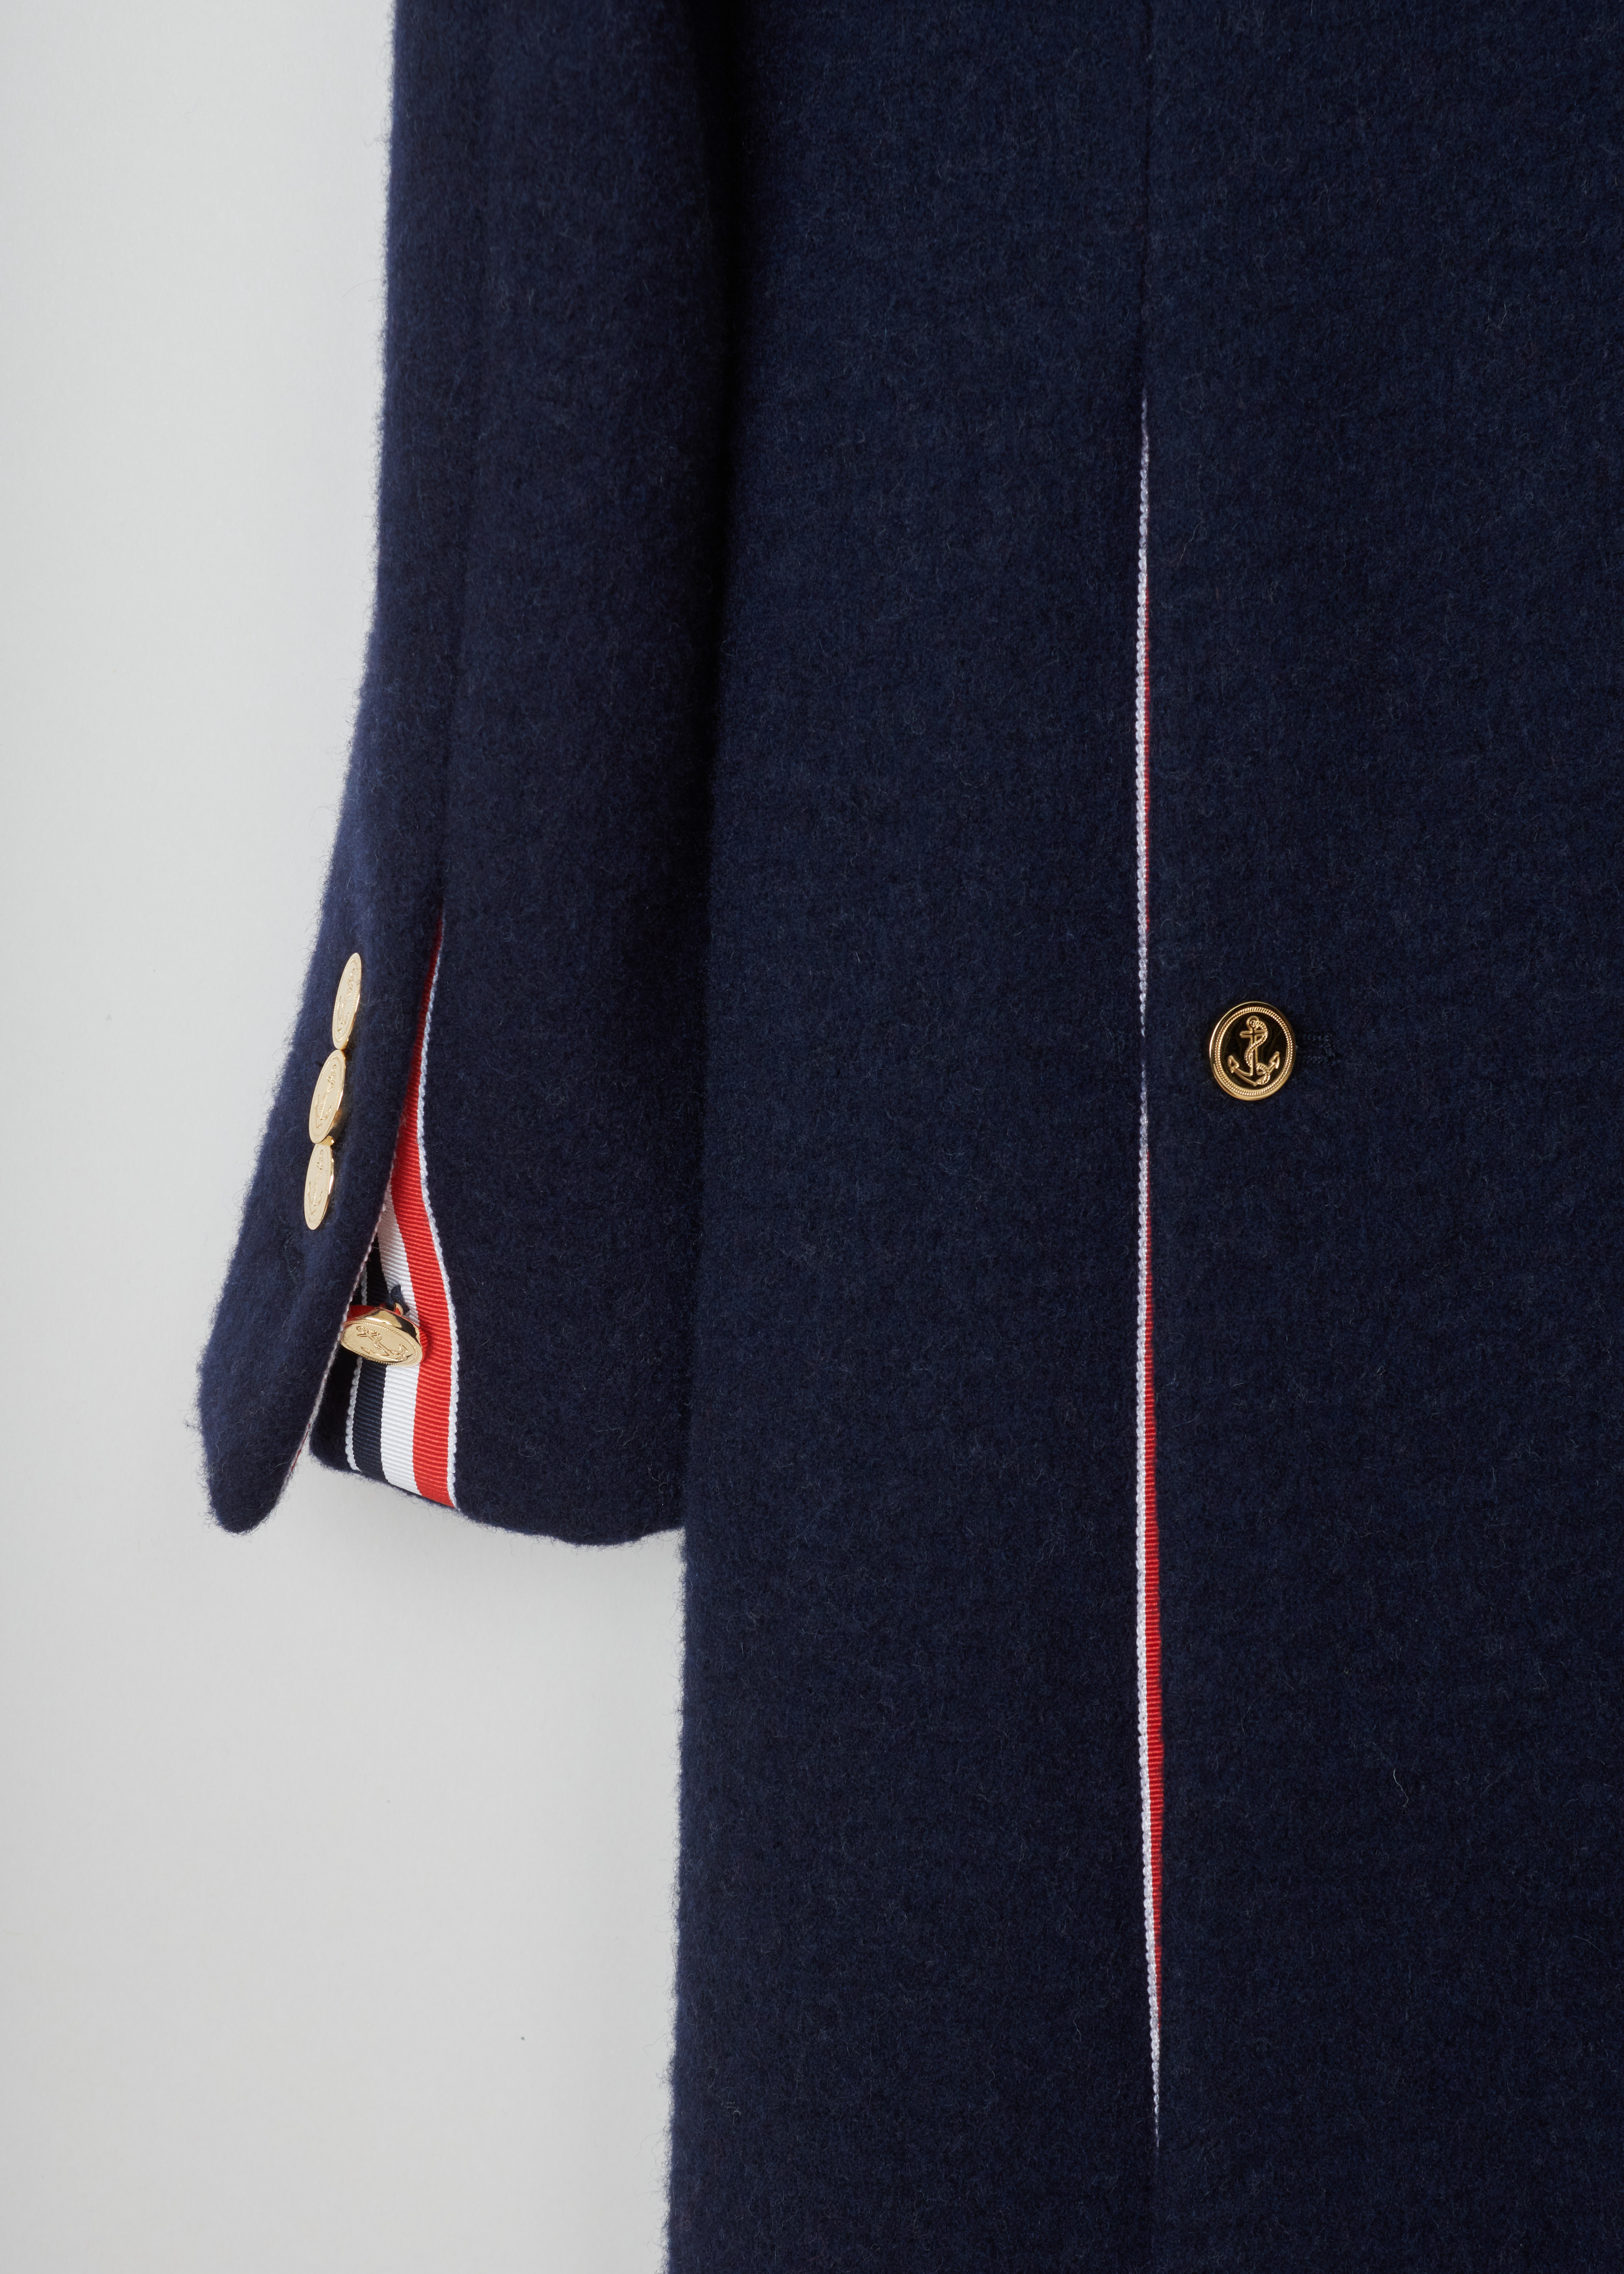 Thom Browne Navy woolen A-line coat FOC411C_03564_415_Navy detail. Wool and cashmere blend coat in a classic silhouet with the iconic Thom Browne stripes on the back, a squared collar, concealed button fastening with one visible gold button and two side pockets.